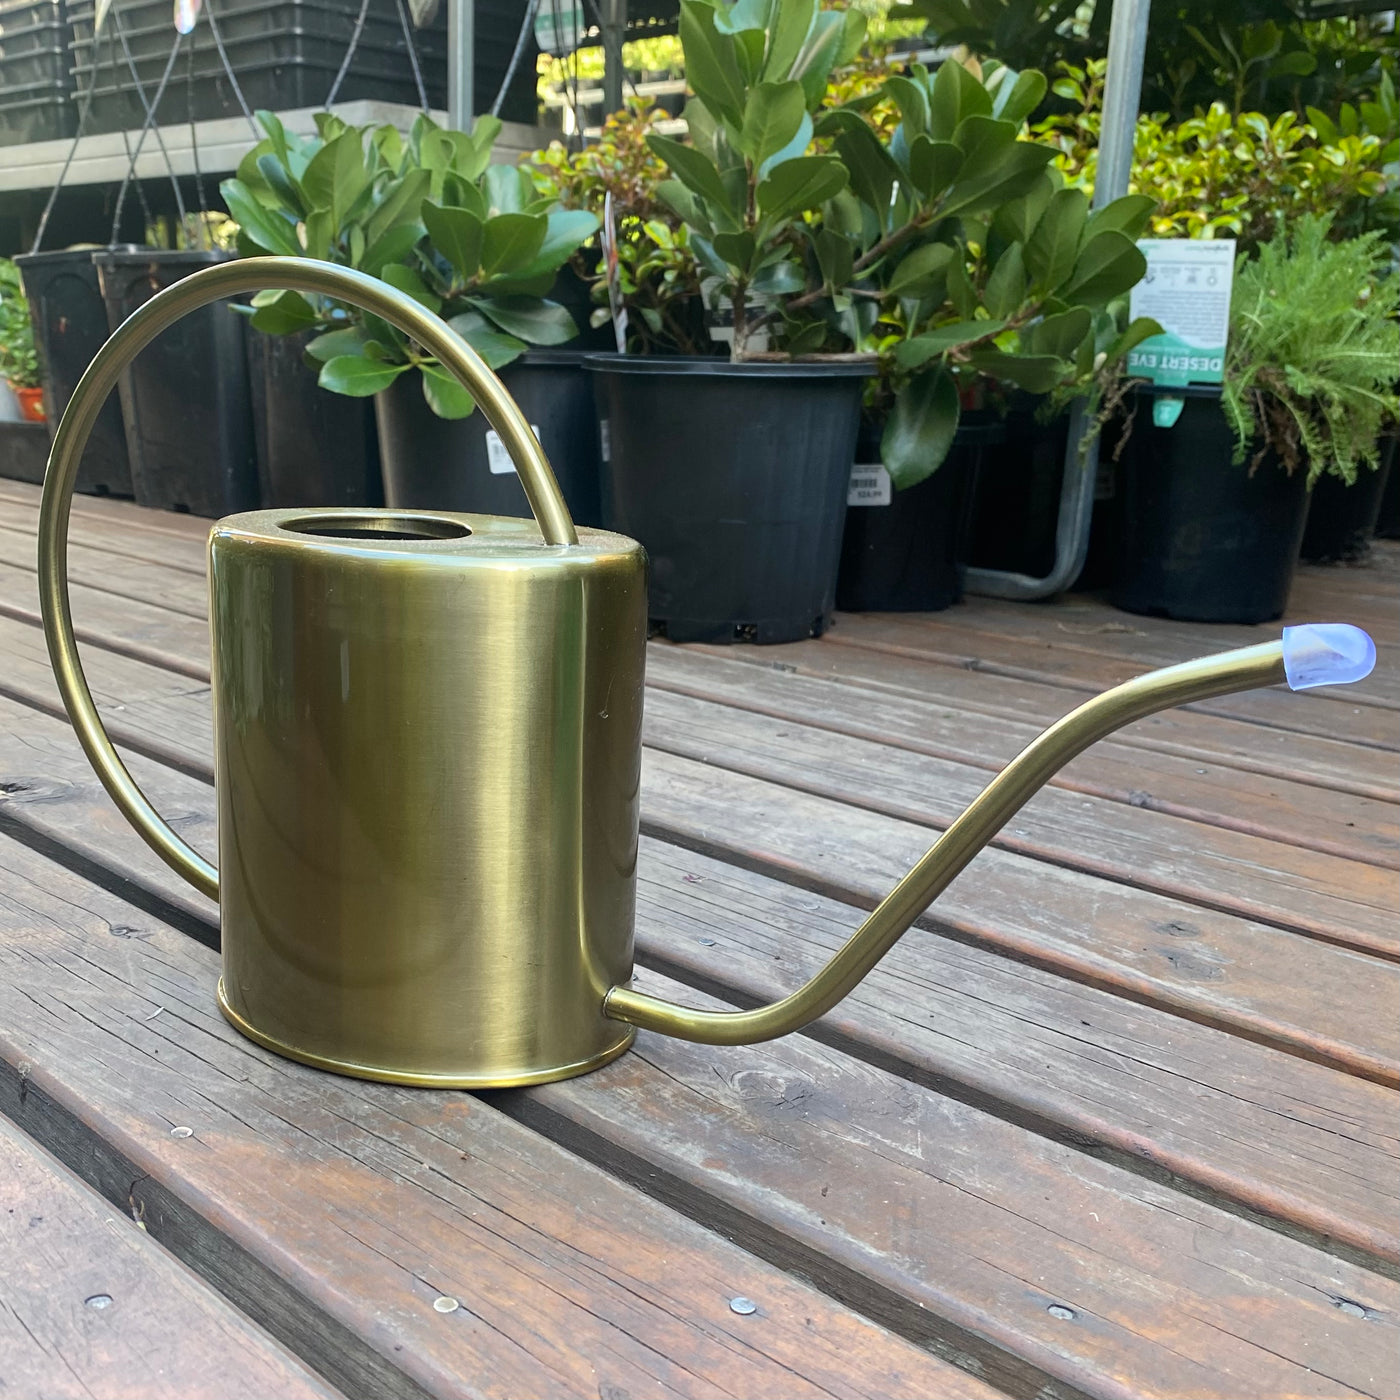 RYSET 1.5L ANTIQUE BRASS WATERING CAN